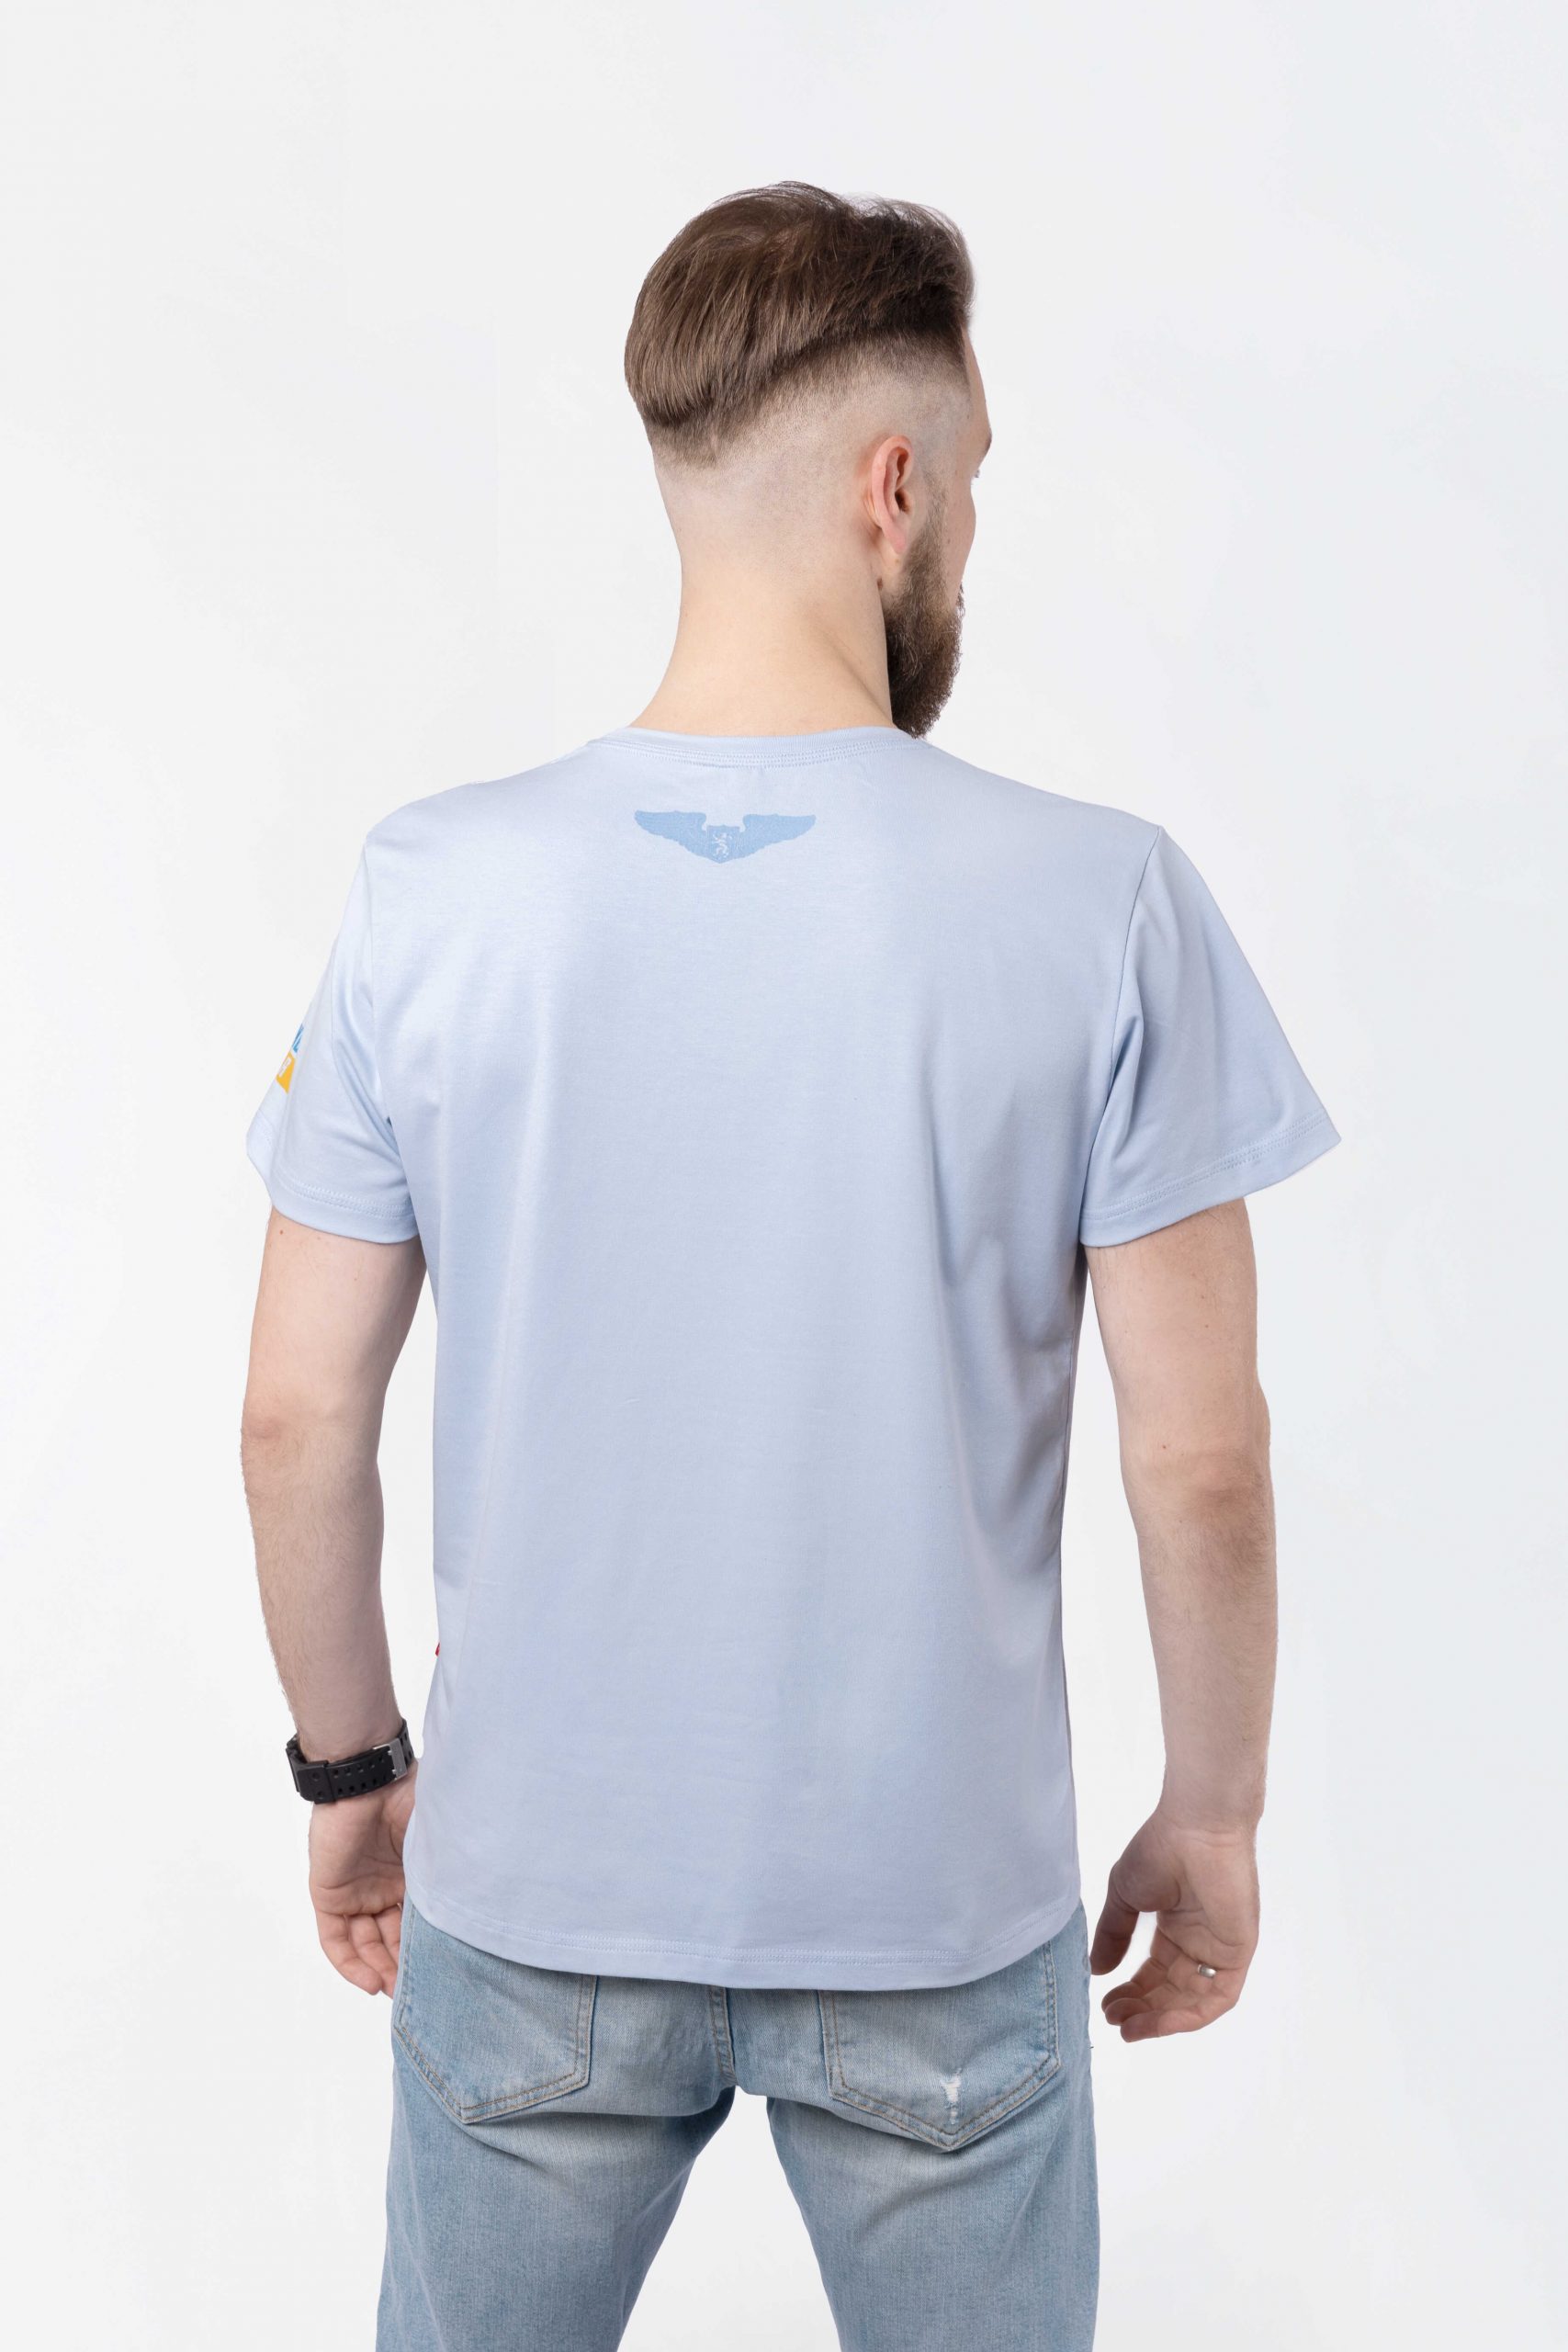 Men's T-Shirt We Are From Ukraine.a. Color light blue. 1.